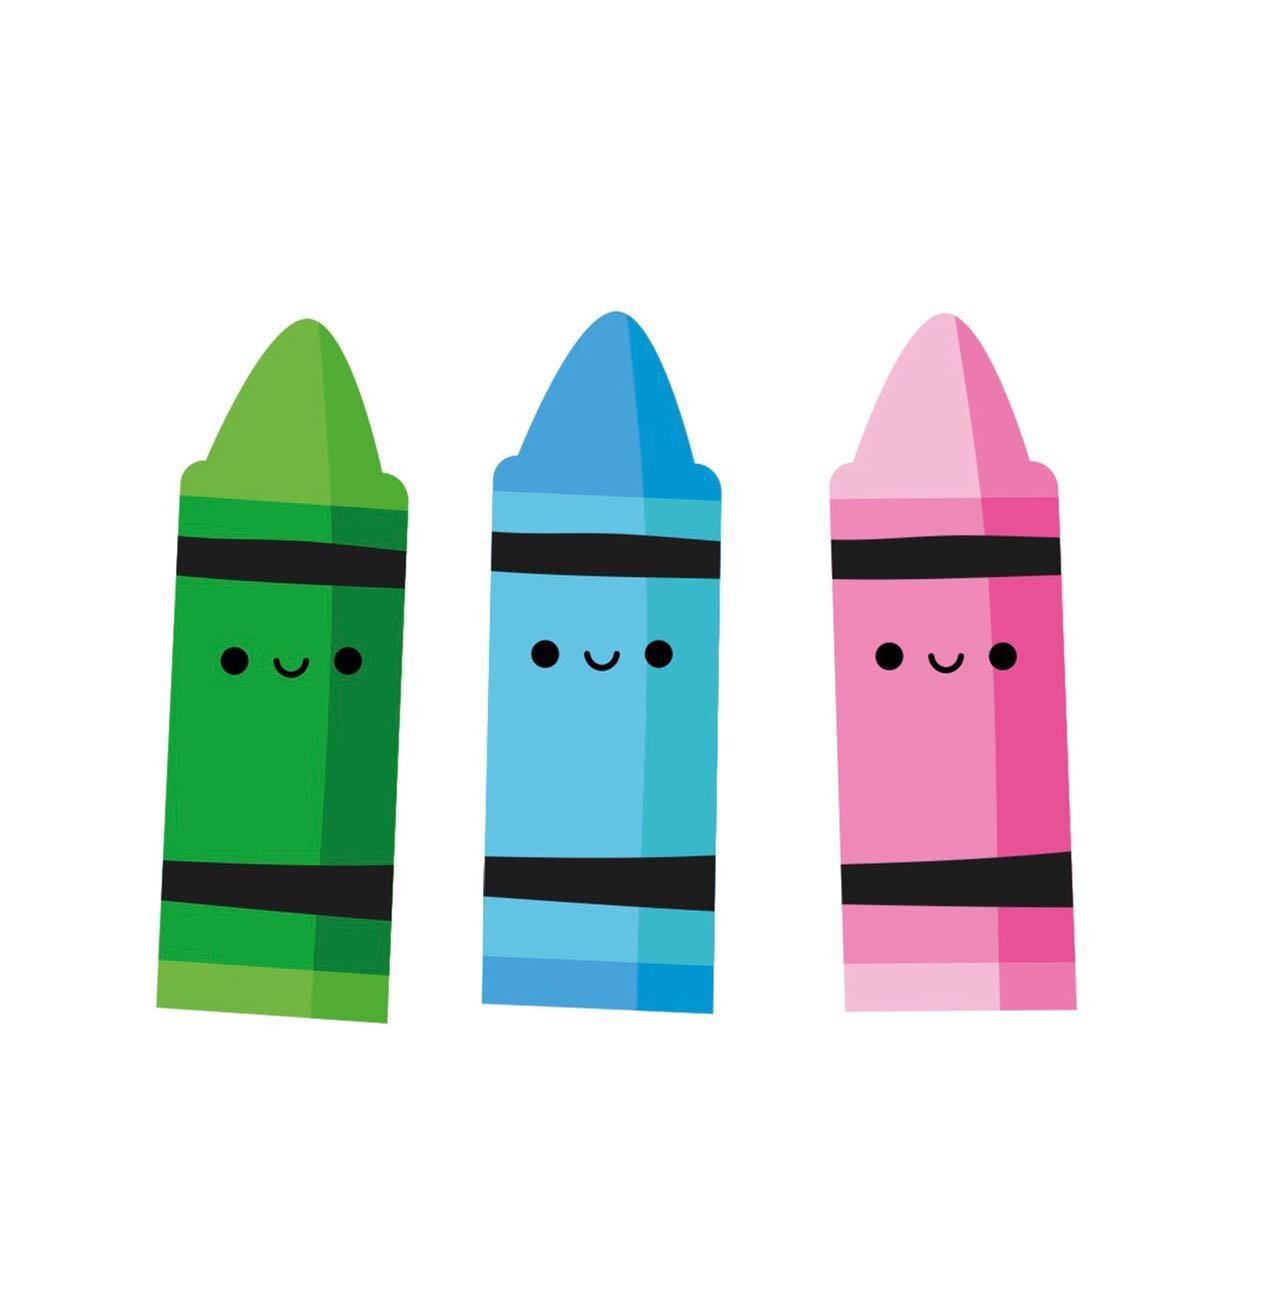 Happy crayons say have a lovely weekend! 🖍💚💙💗 #kidlitart #kidlitillustration #cuteillustration #crayons #childrensillustrators #